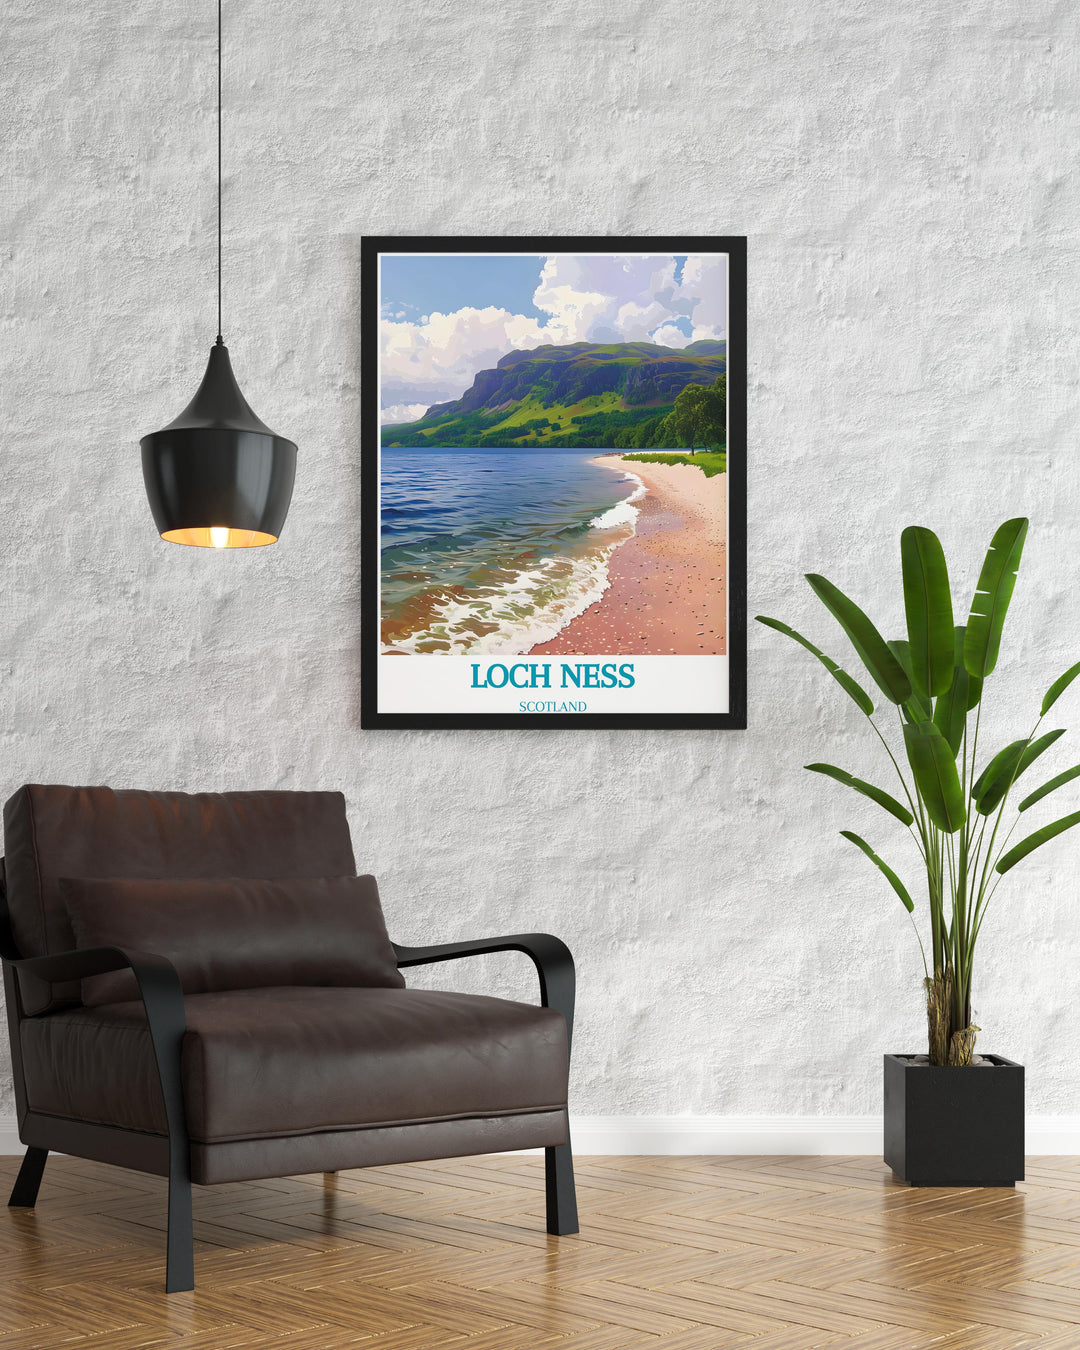 Artistic portrayal of the tranquil waters of Loch Ness, showcasing the peaceful scenery ideal for any living space.